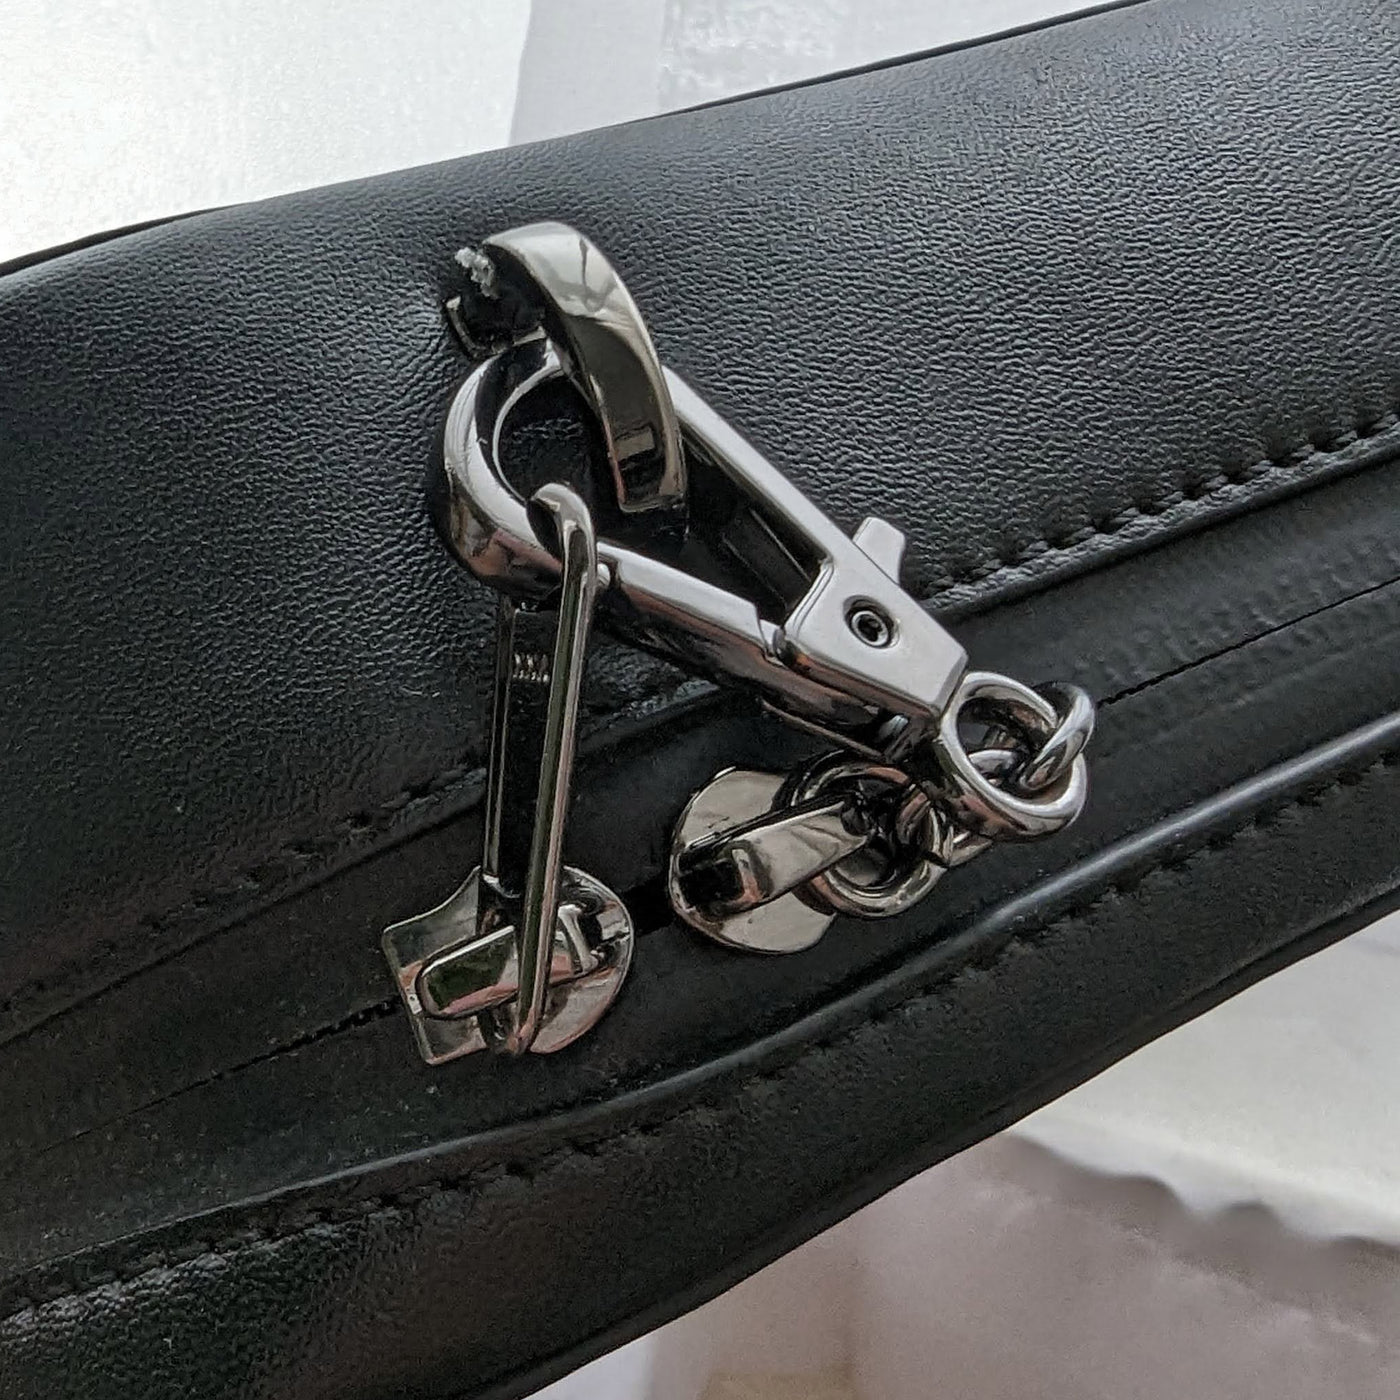 Anti-theft Water-resistant Travel Crossbody - Elise Crossbody in Black Gunmetal with slash-resistant faux leather & locking clasps straps - closeup of zipper clasp to strap attachment - Arden Cove